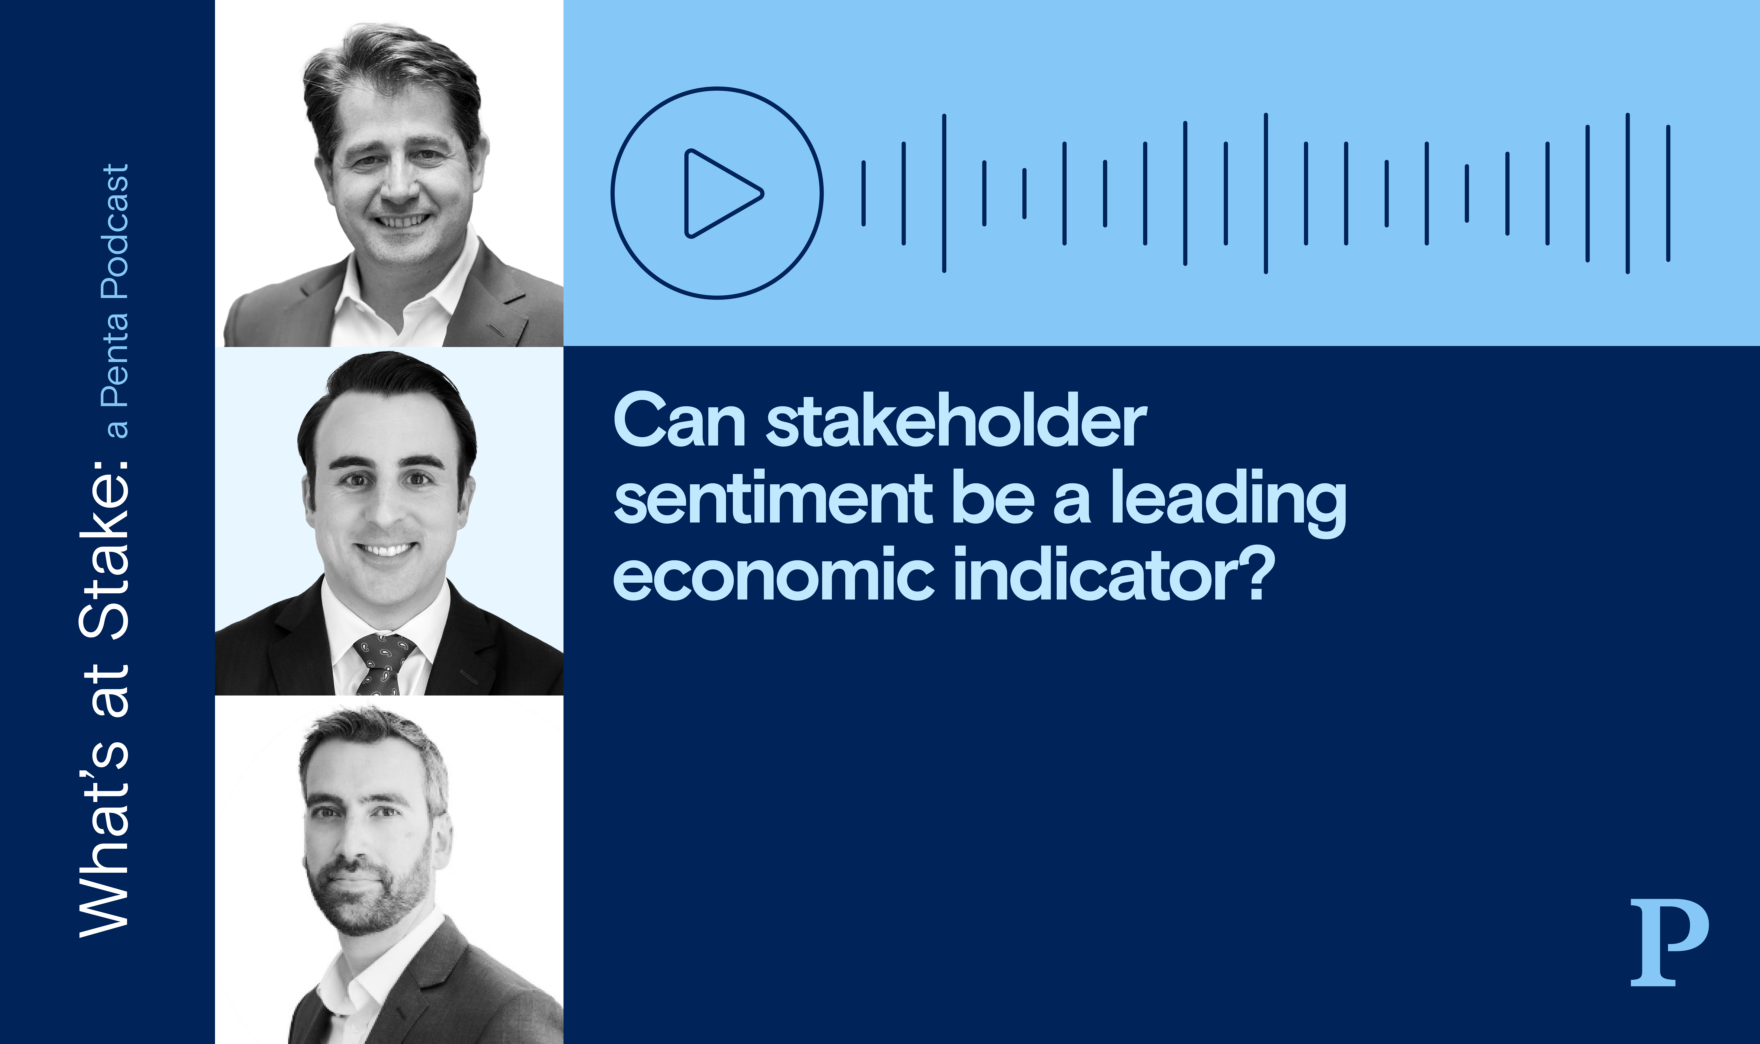 Can stakeholder sentiment be a leading economic indicator?